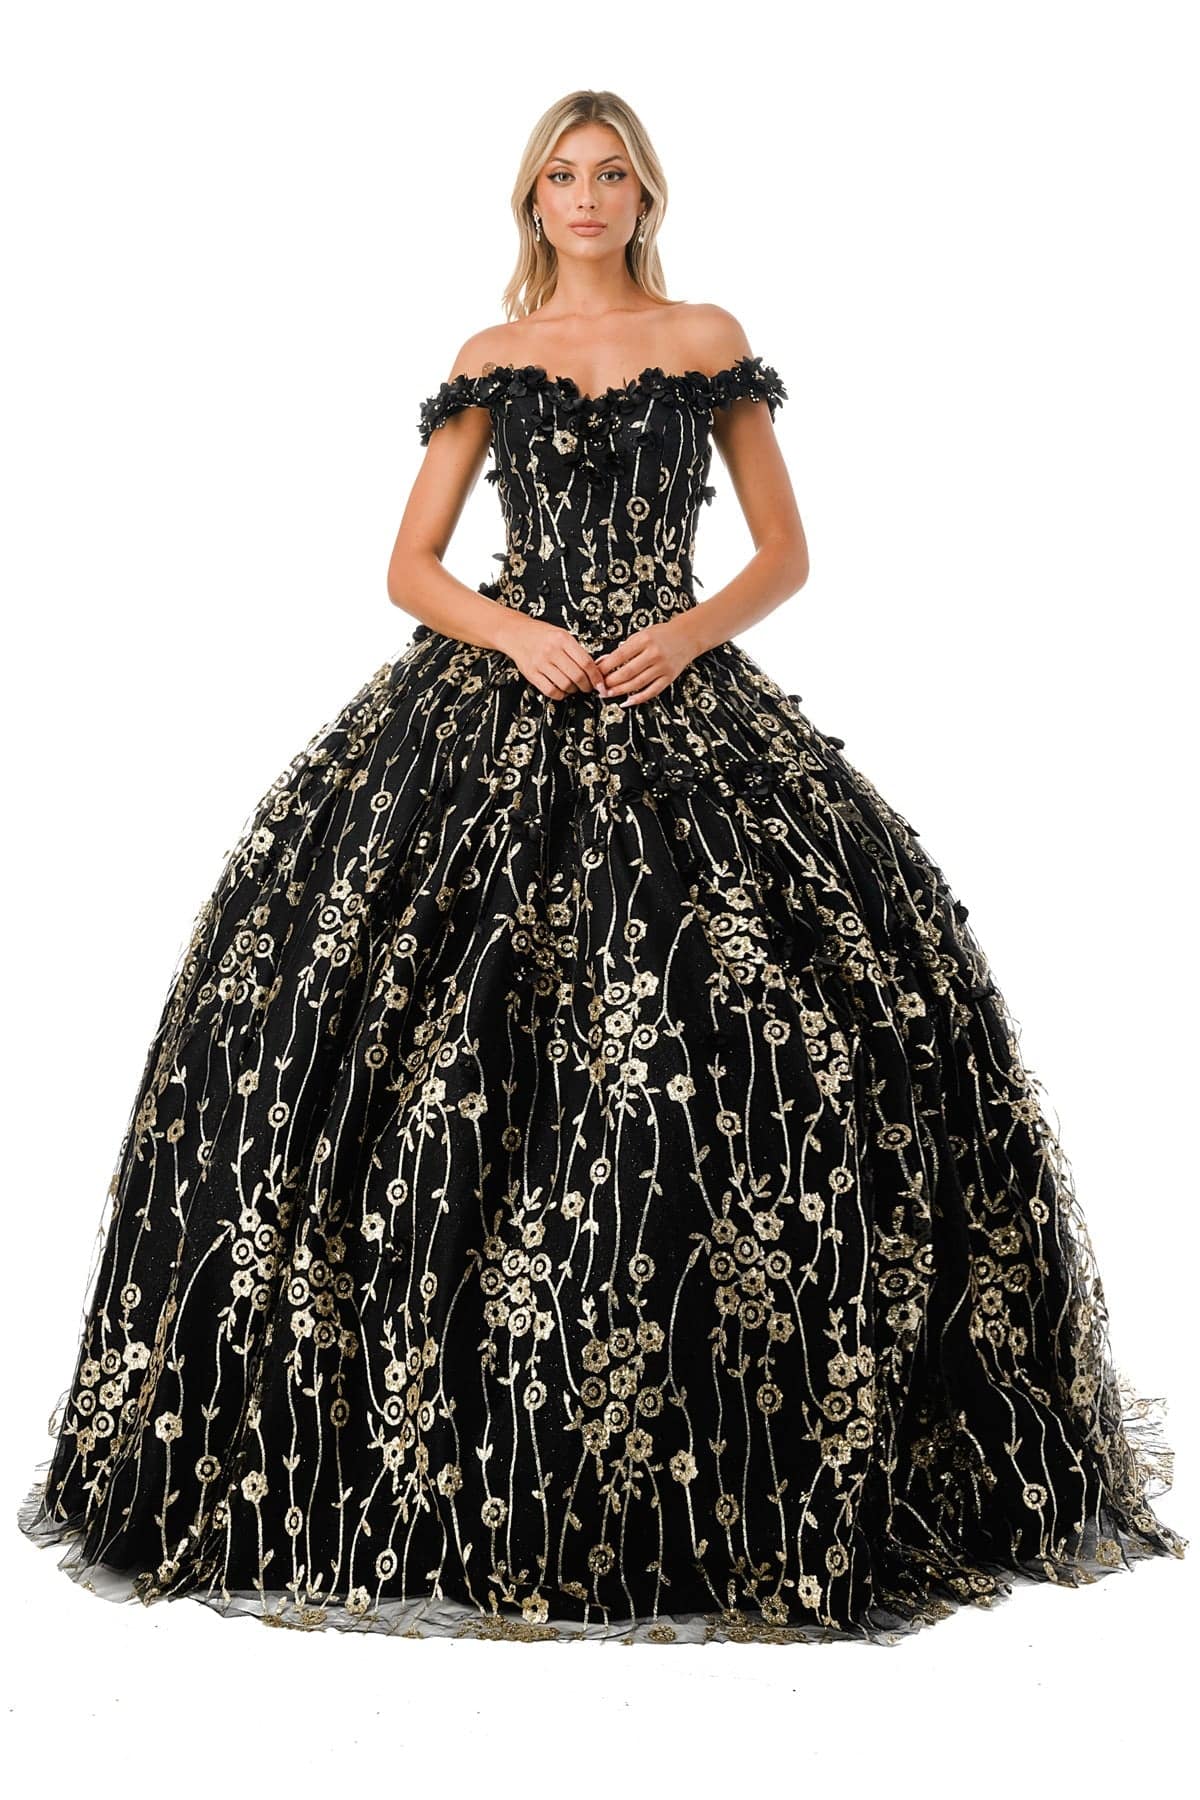 Aspeed L2766A Gorgeous Black & Gold Floral Inspired Quinceanera Dress - NORMA REED